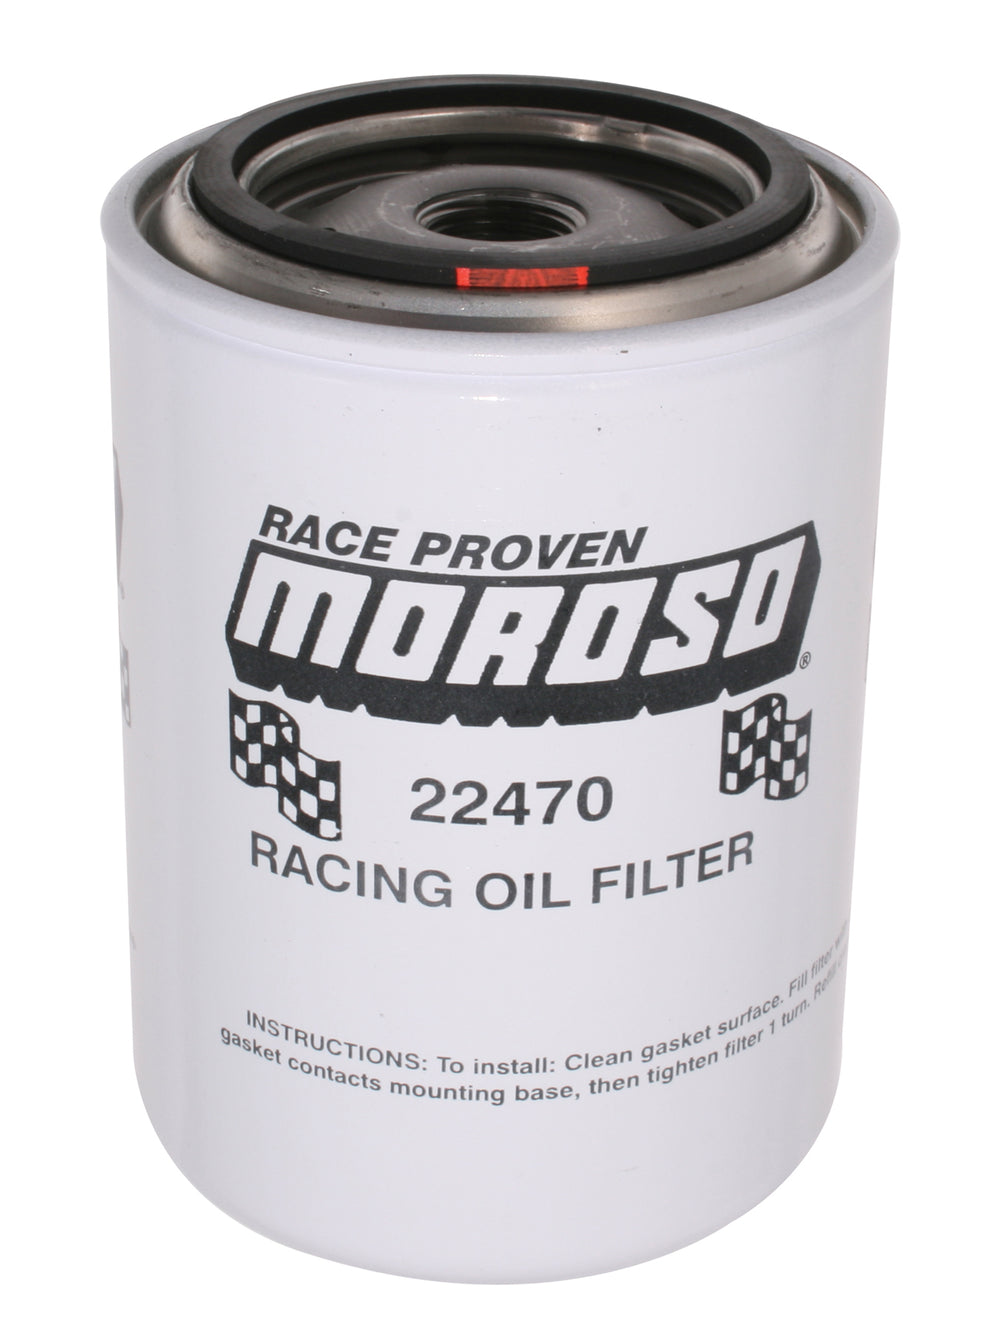 OIL FILTER, FORD, MOPAR AND IMPORT, 3/4 IN. THREAD, 5 1/4 IN. TALL, RACING